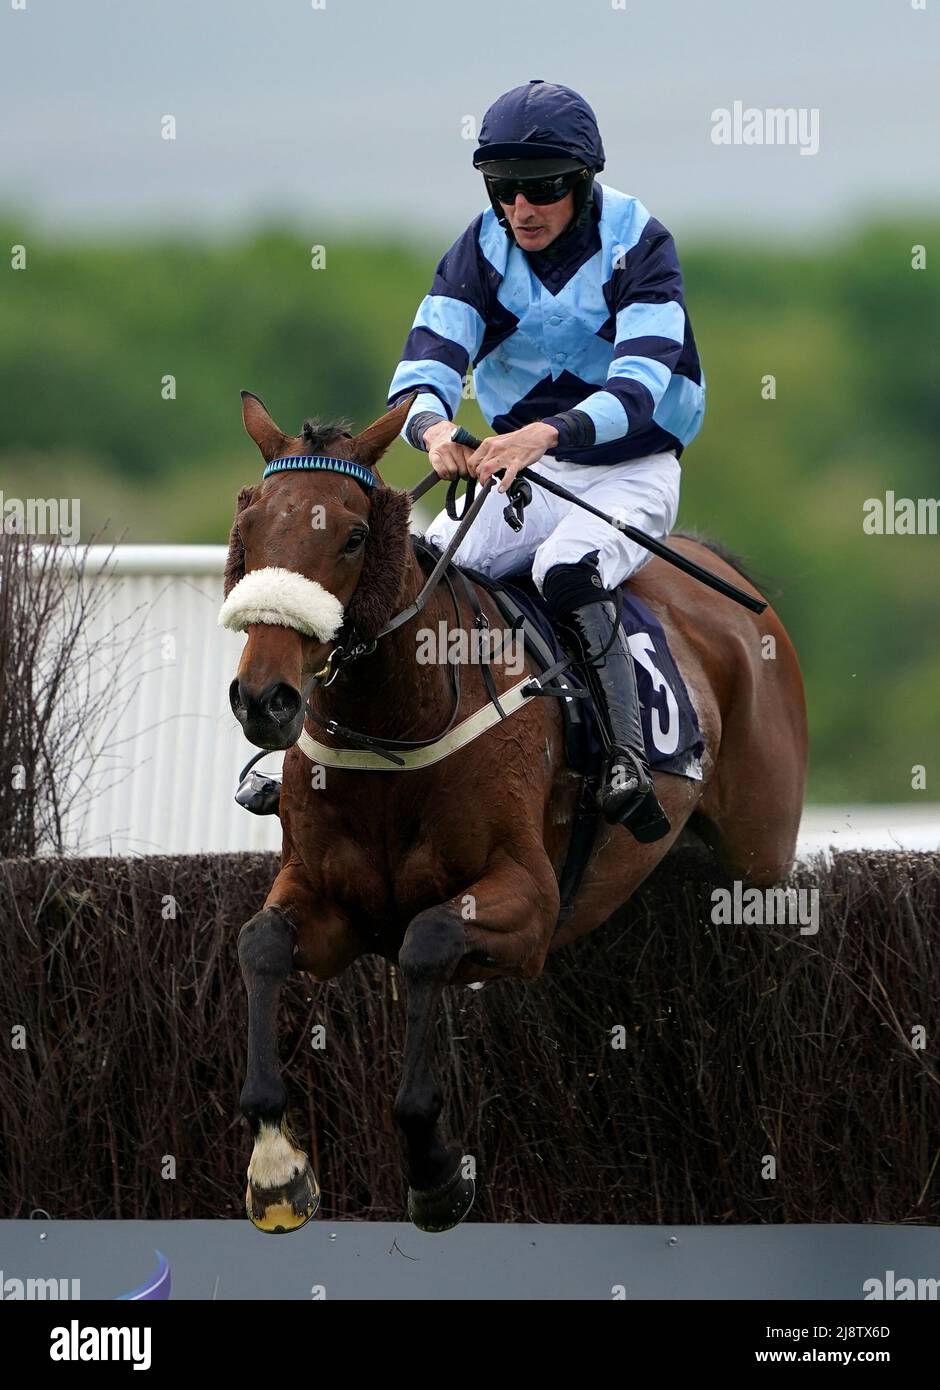 Loughermore ridden by William Shanahan goes on to win the Ryley Wealth Management Novices' Handicap Chase (GBB Race) at Southwell racecourse, Nottinghamshire. Picture date: Wednesday May 18, 2022. Stock Photo